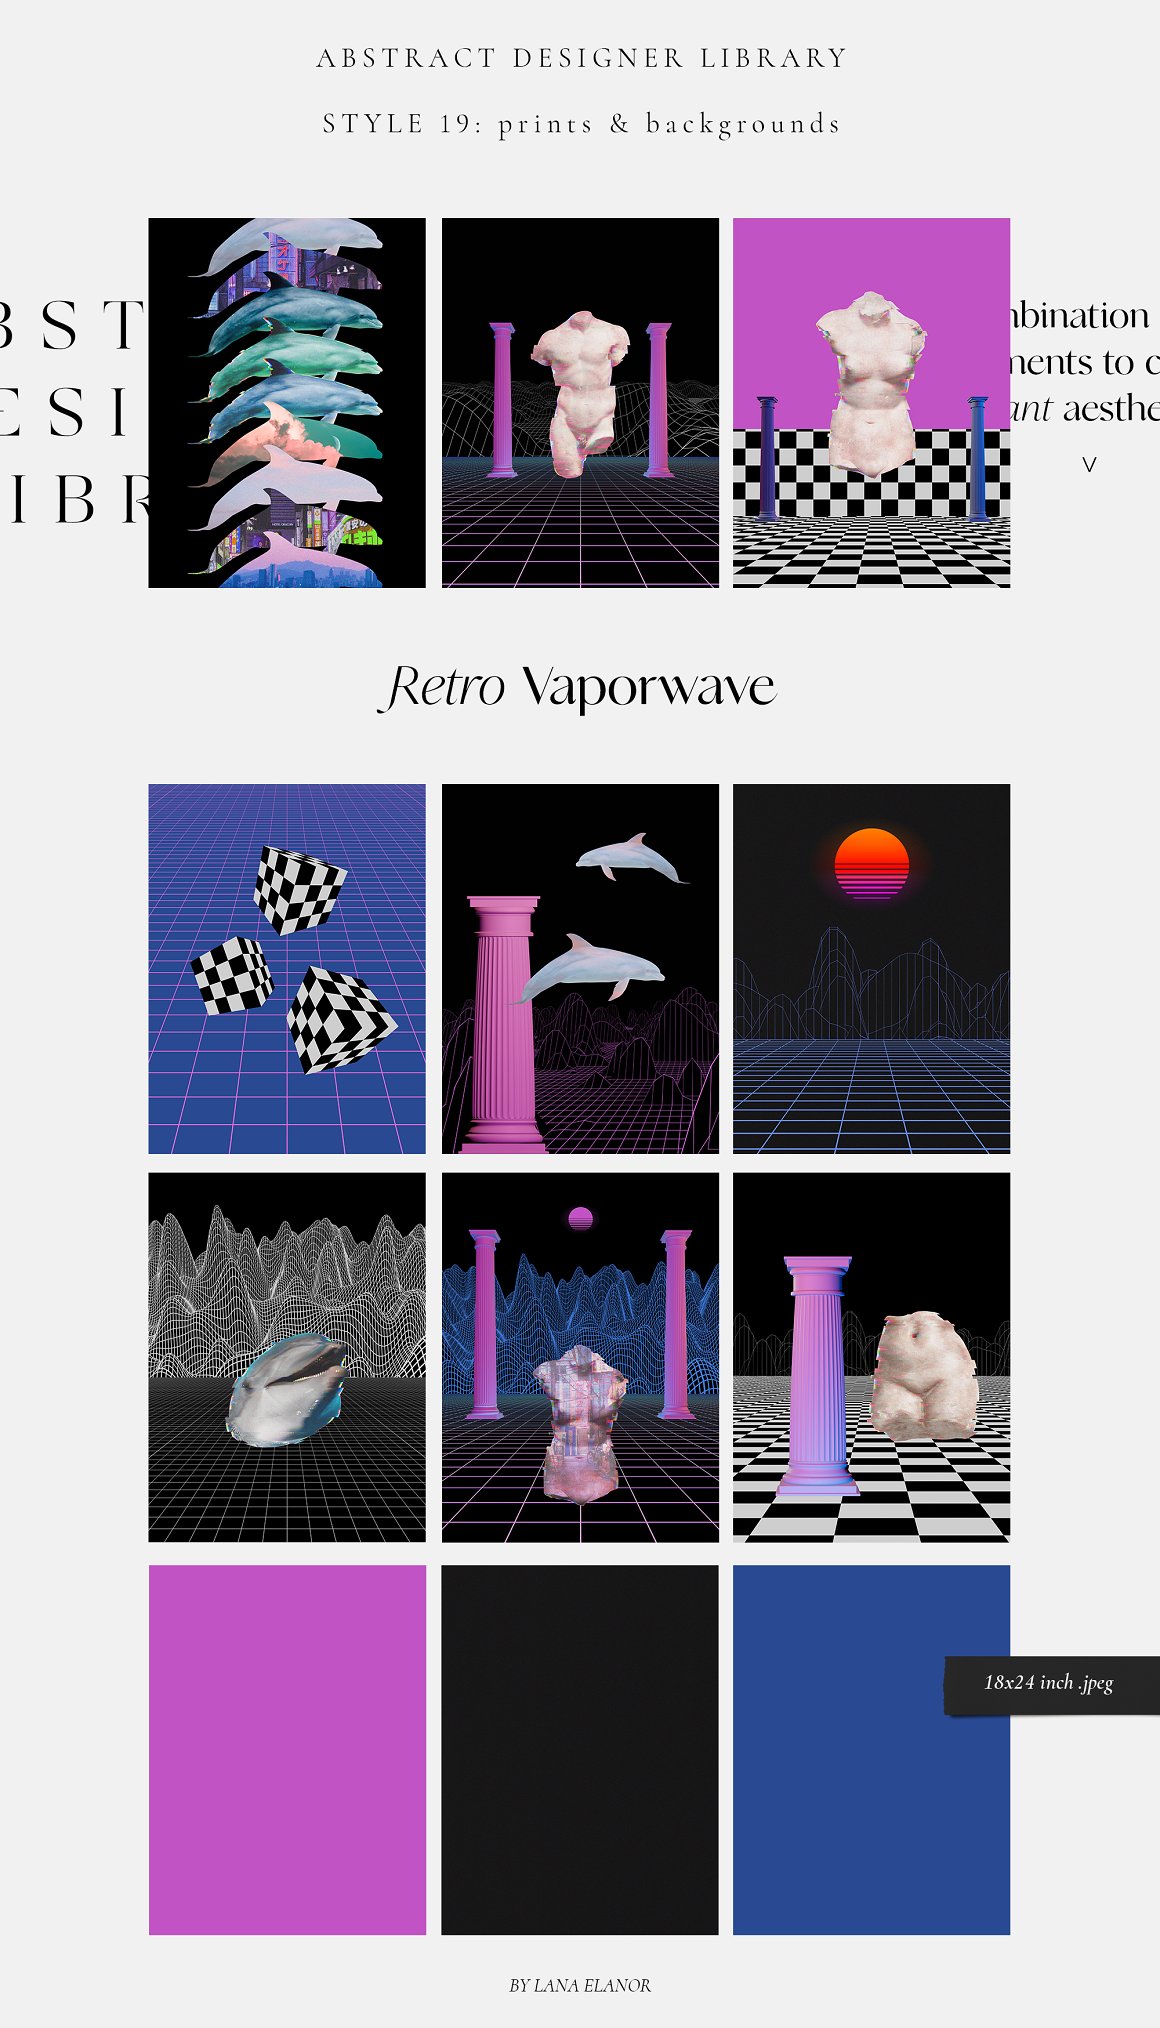 Retro vaporwave library on a gray background.